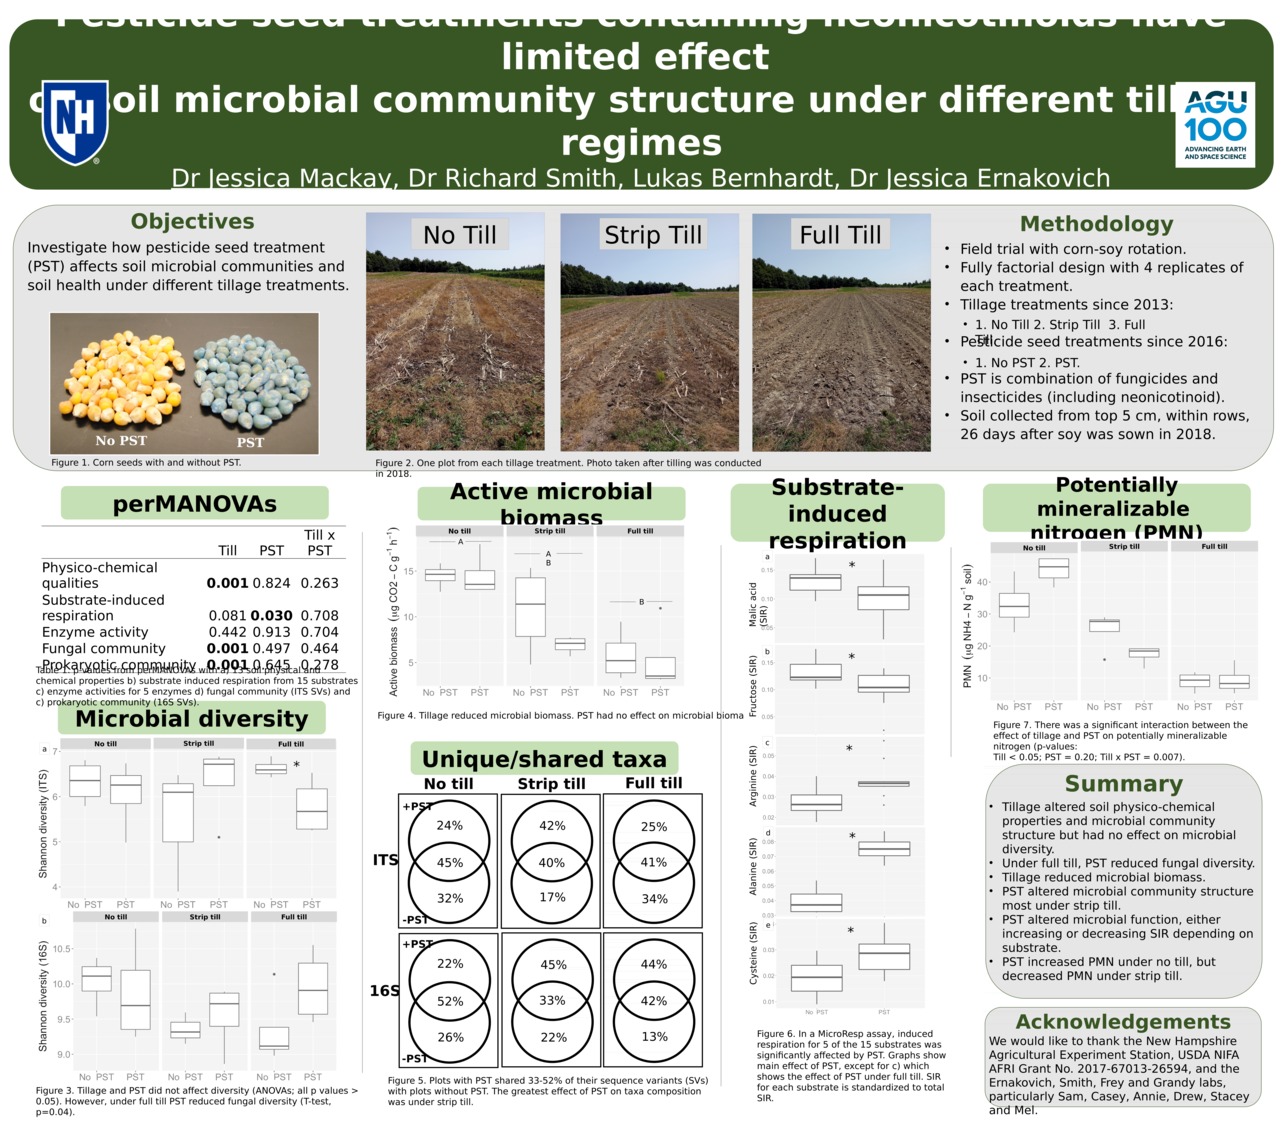 Pesticide Seed Treatments Containing Neonicotinoids Have Limited Effect  On Soil Microbial Community Structure Under Different Tillage Regimes by jem1101